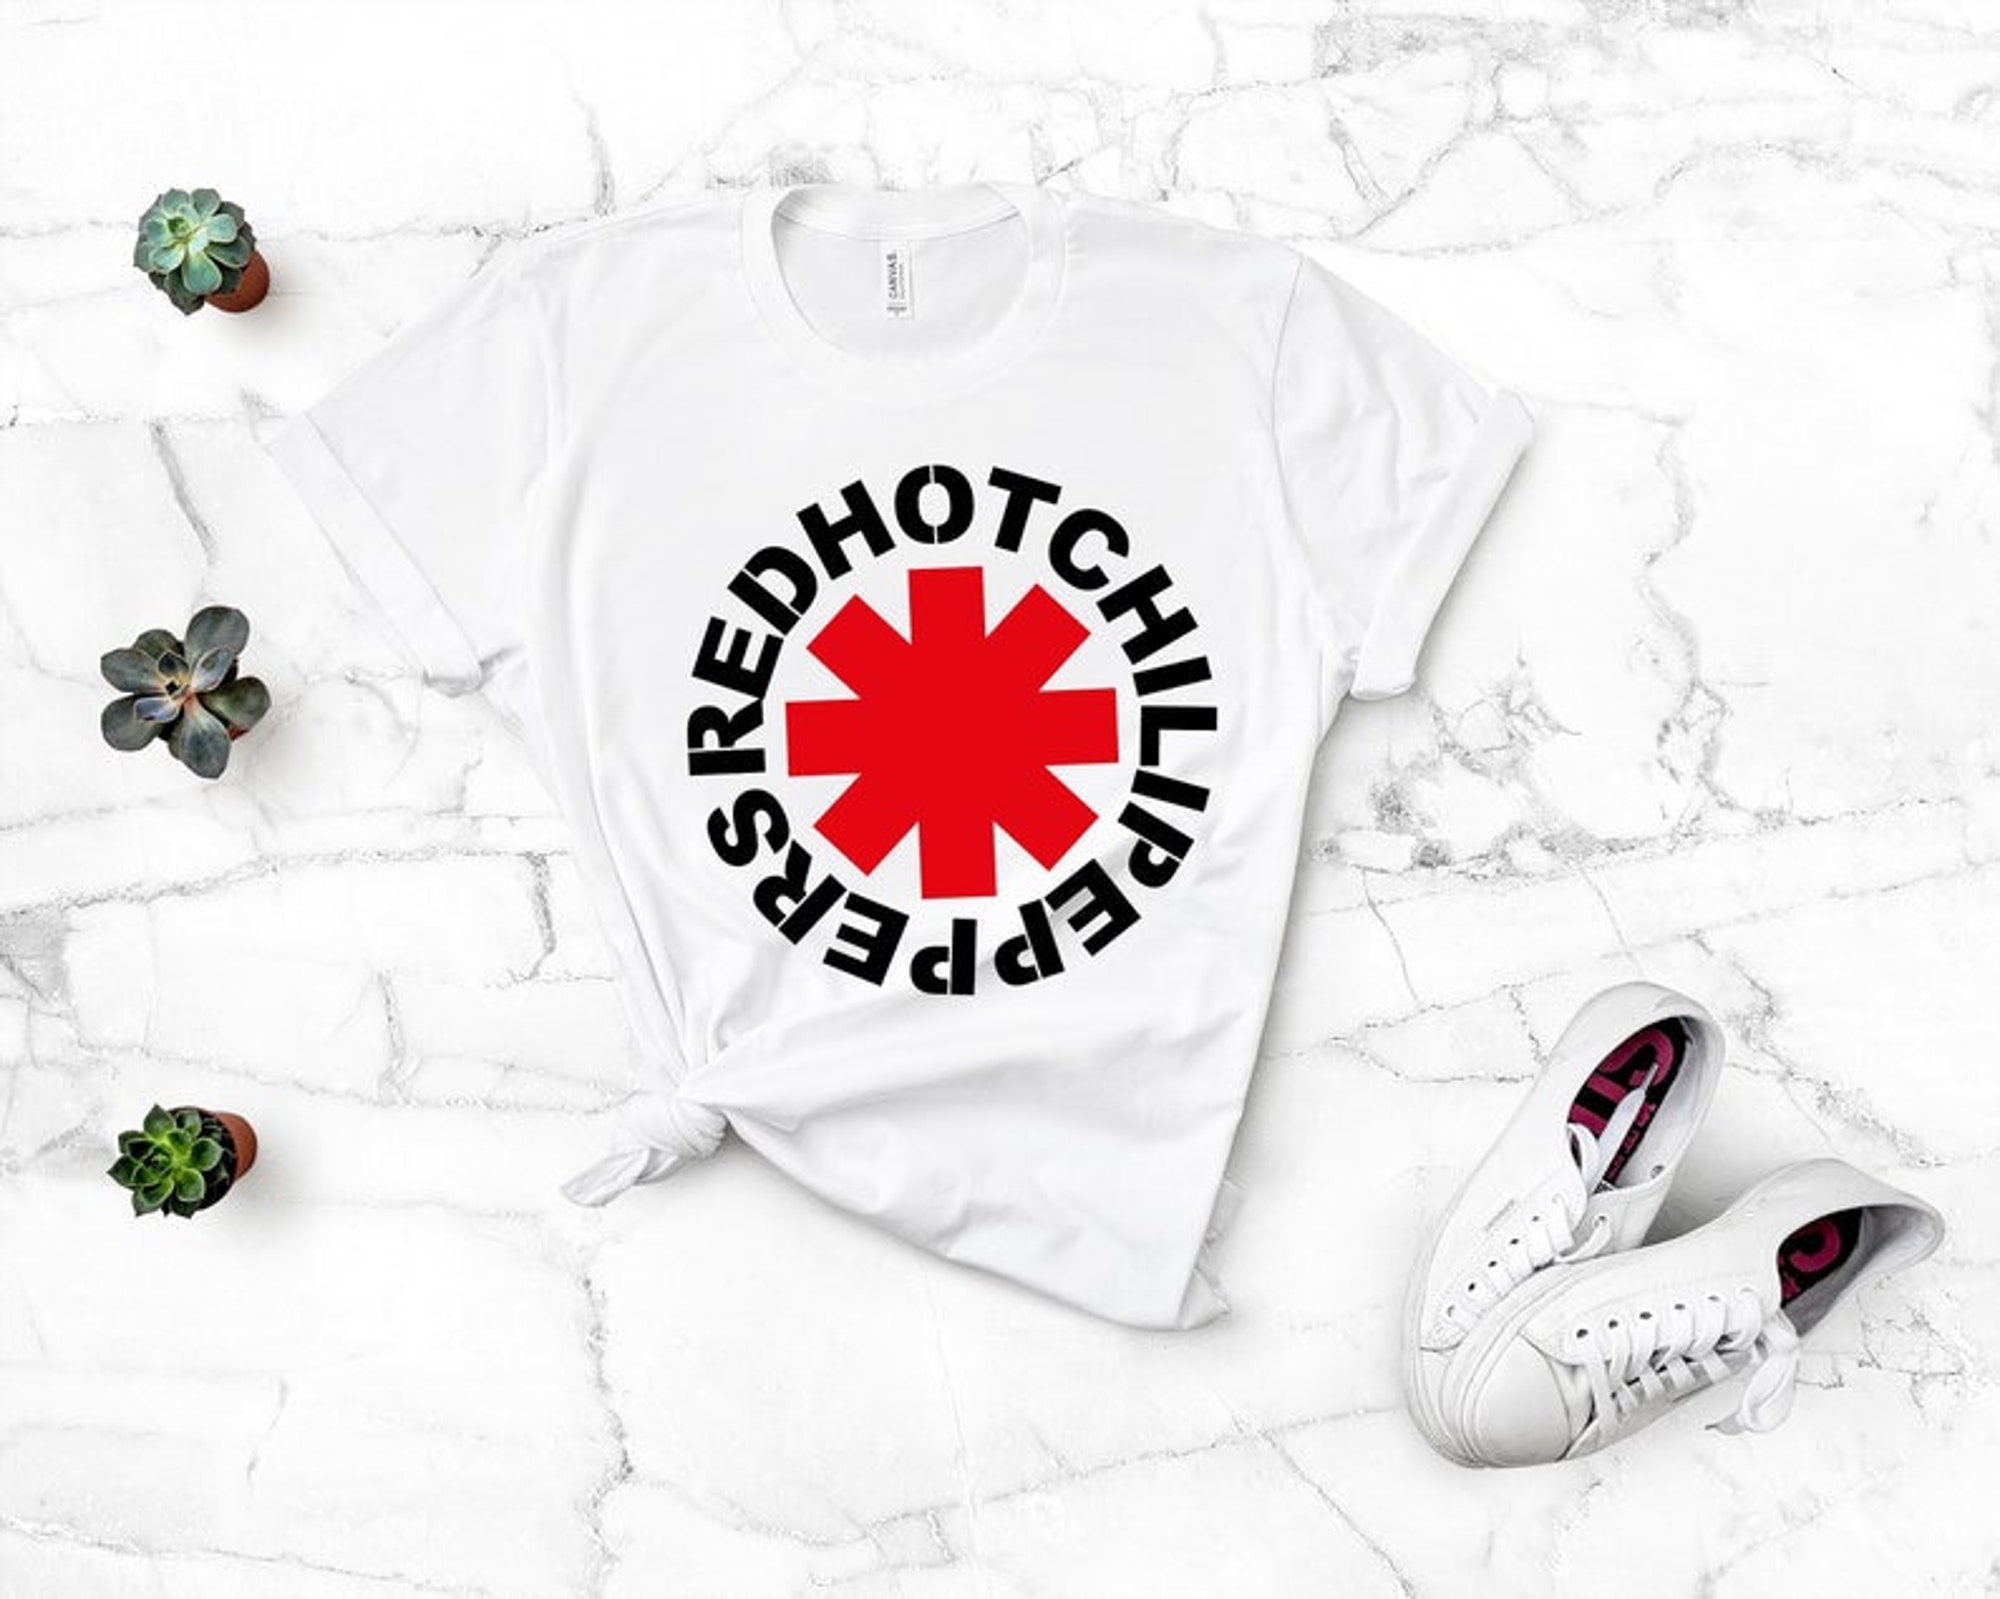 Red Hot Chili Peppers Shirt, Concert Shirt, Band Tee, Hot Chili Peppers Tshirt